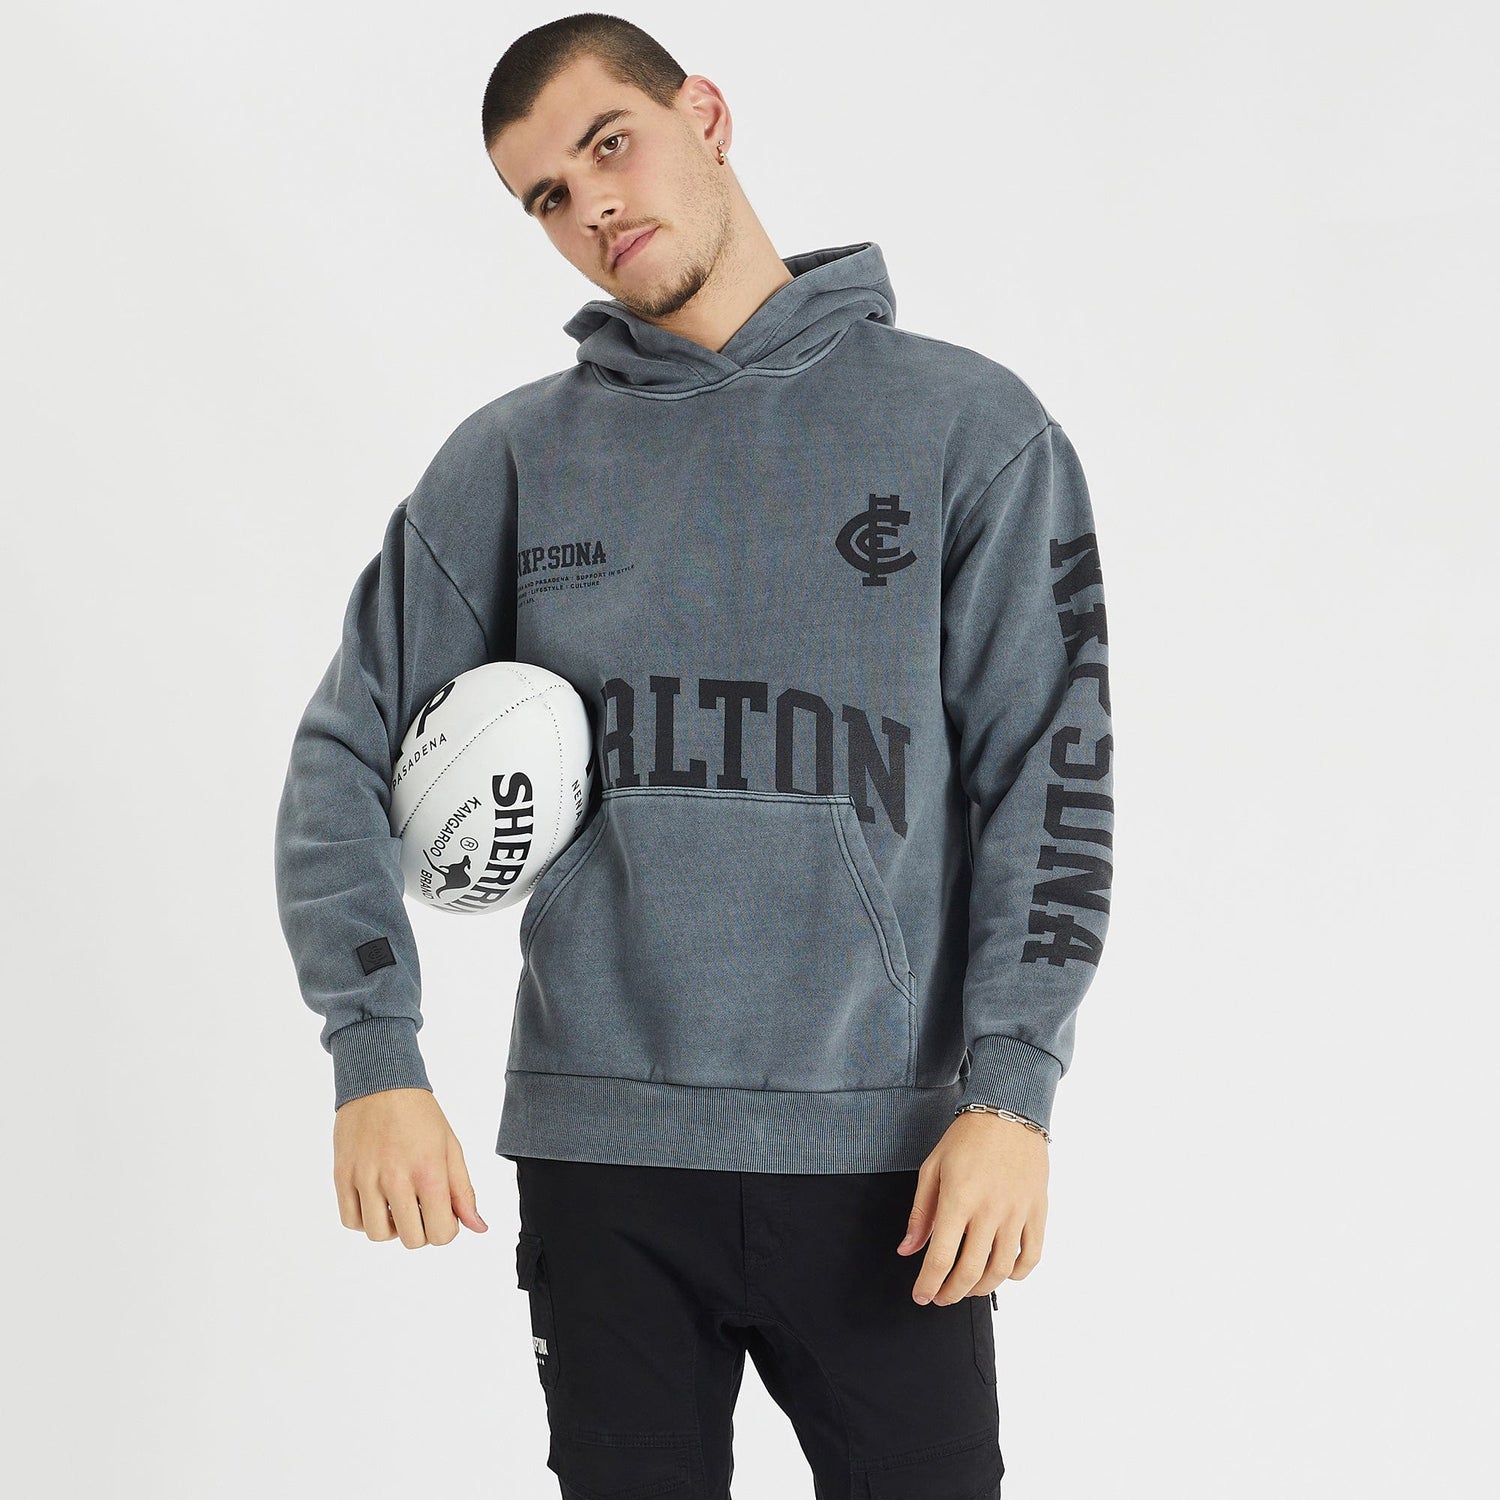 Carlton Blues Relaxed Hoodie Pigment Charcoal